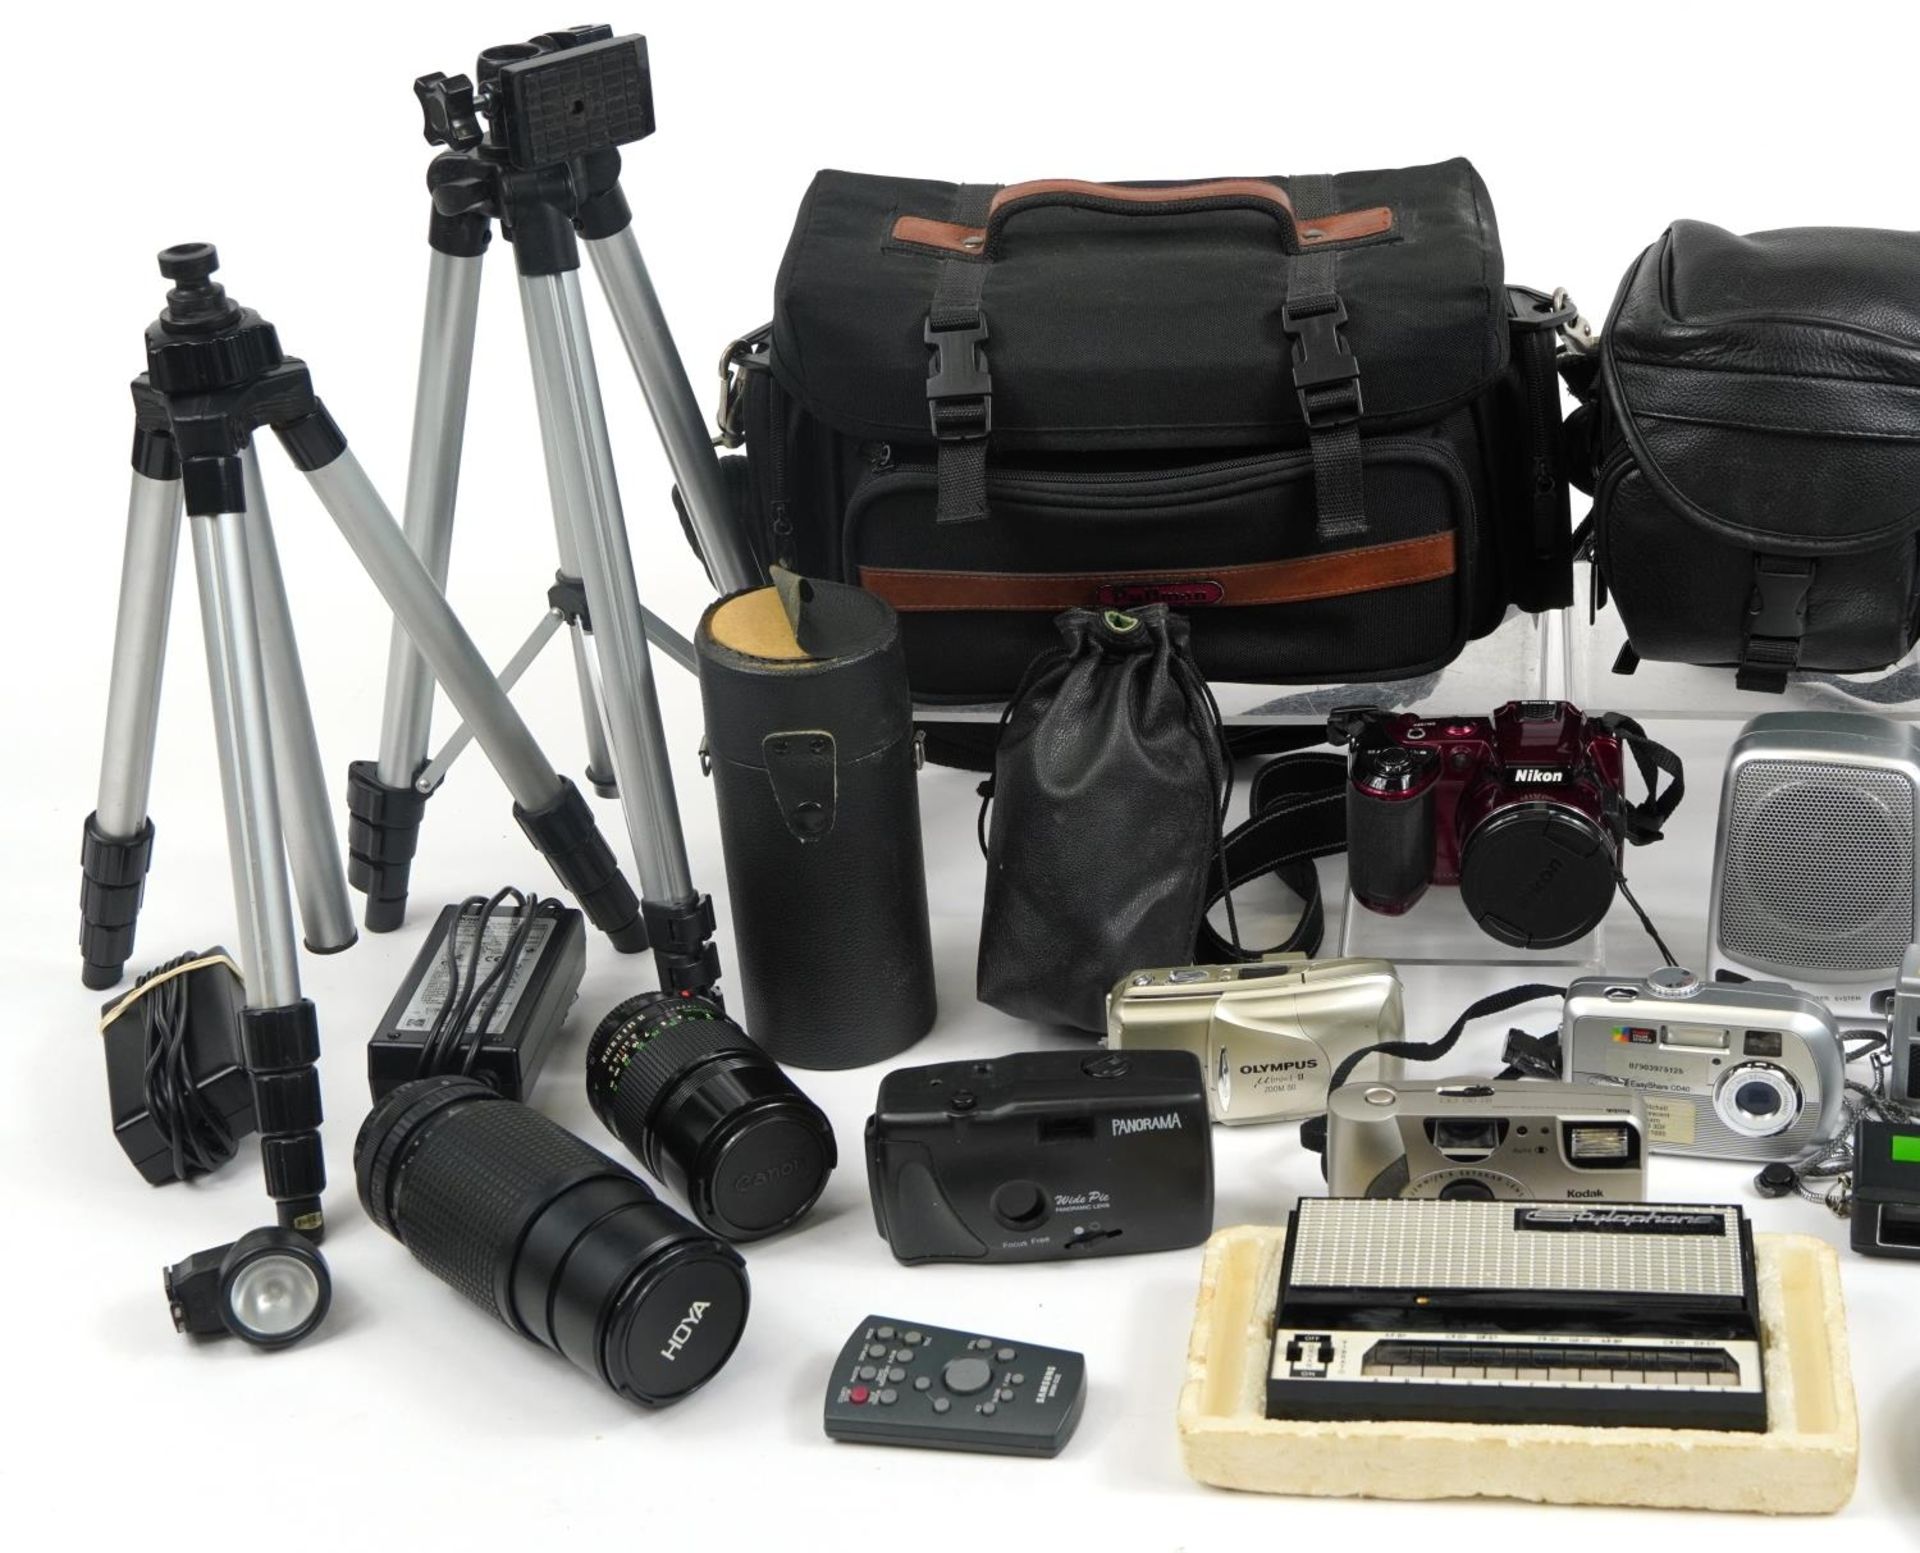 Camera accessories and electricals including Nikon Coolpix L120, Hoya 80-205mm lens and a - Bild 2 aus 3